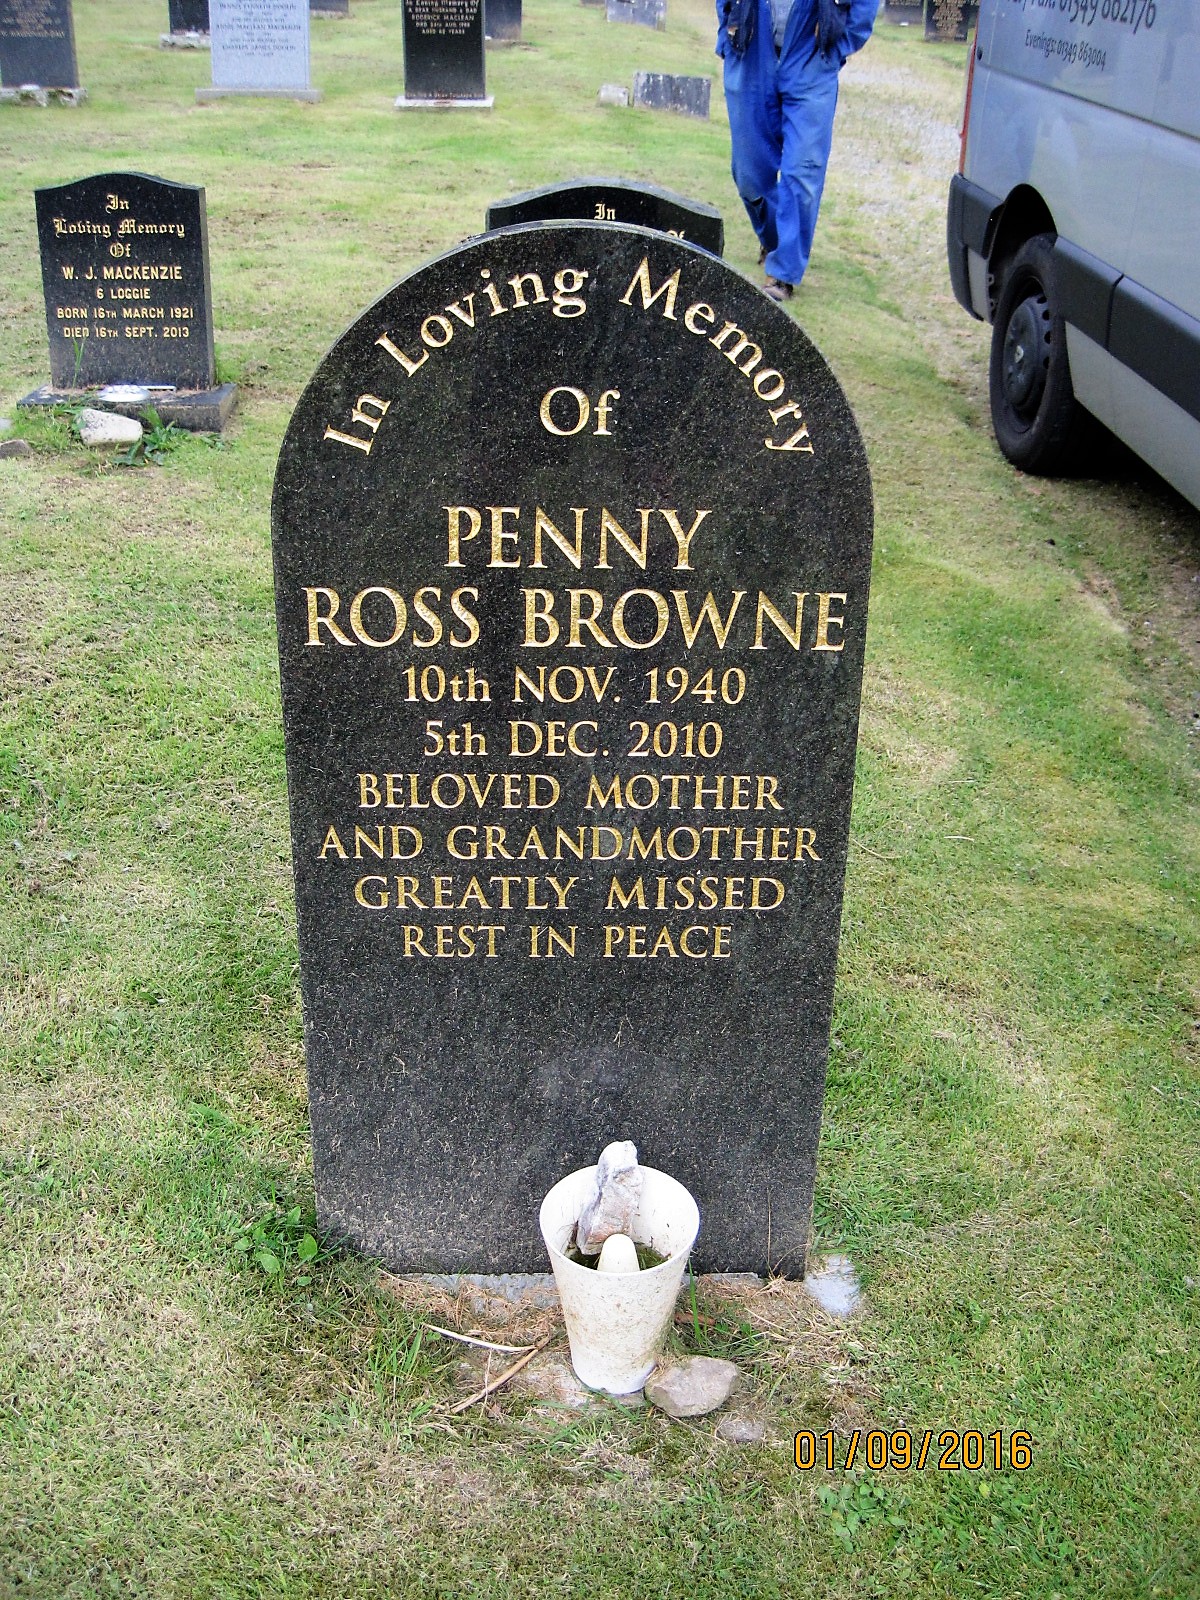 N10 - In loving memory of Penny Ross Browne, 10th Nov 1940, 5th Dec. 2010.  Beloved Mother and Grandmother.  Greatly missed.  Rest in Peace.